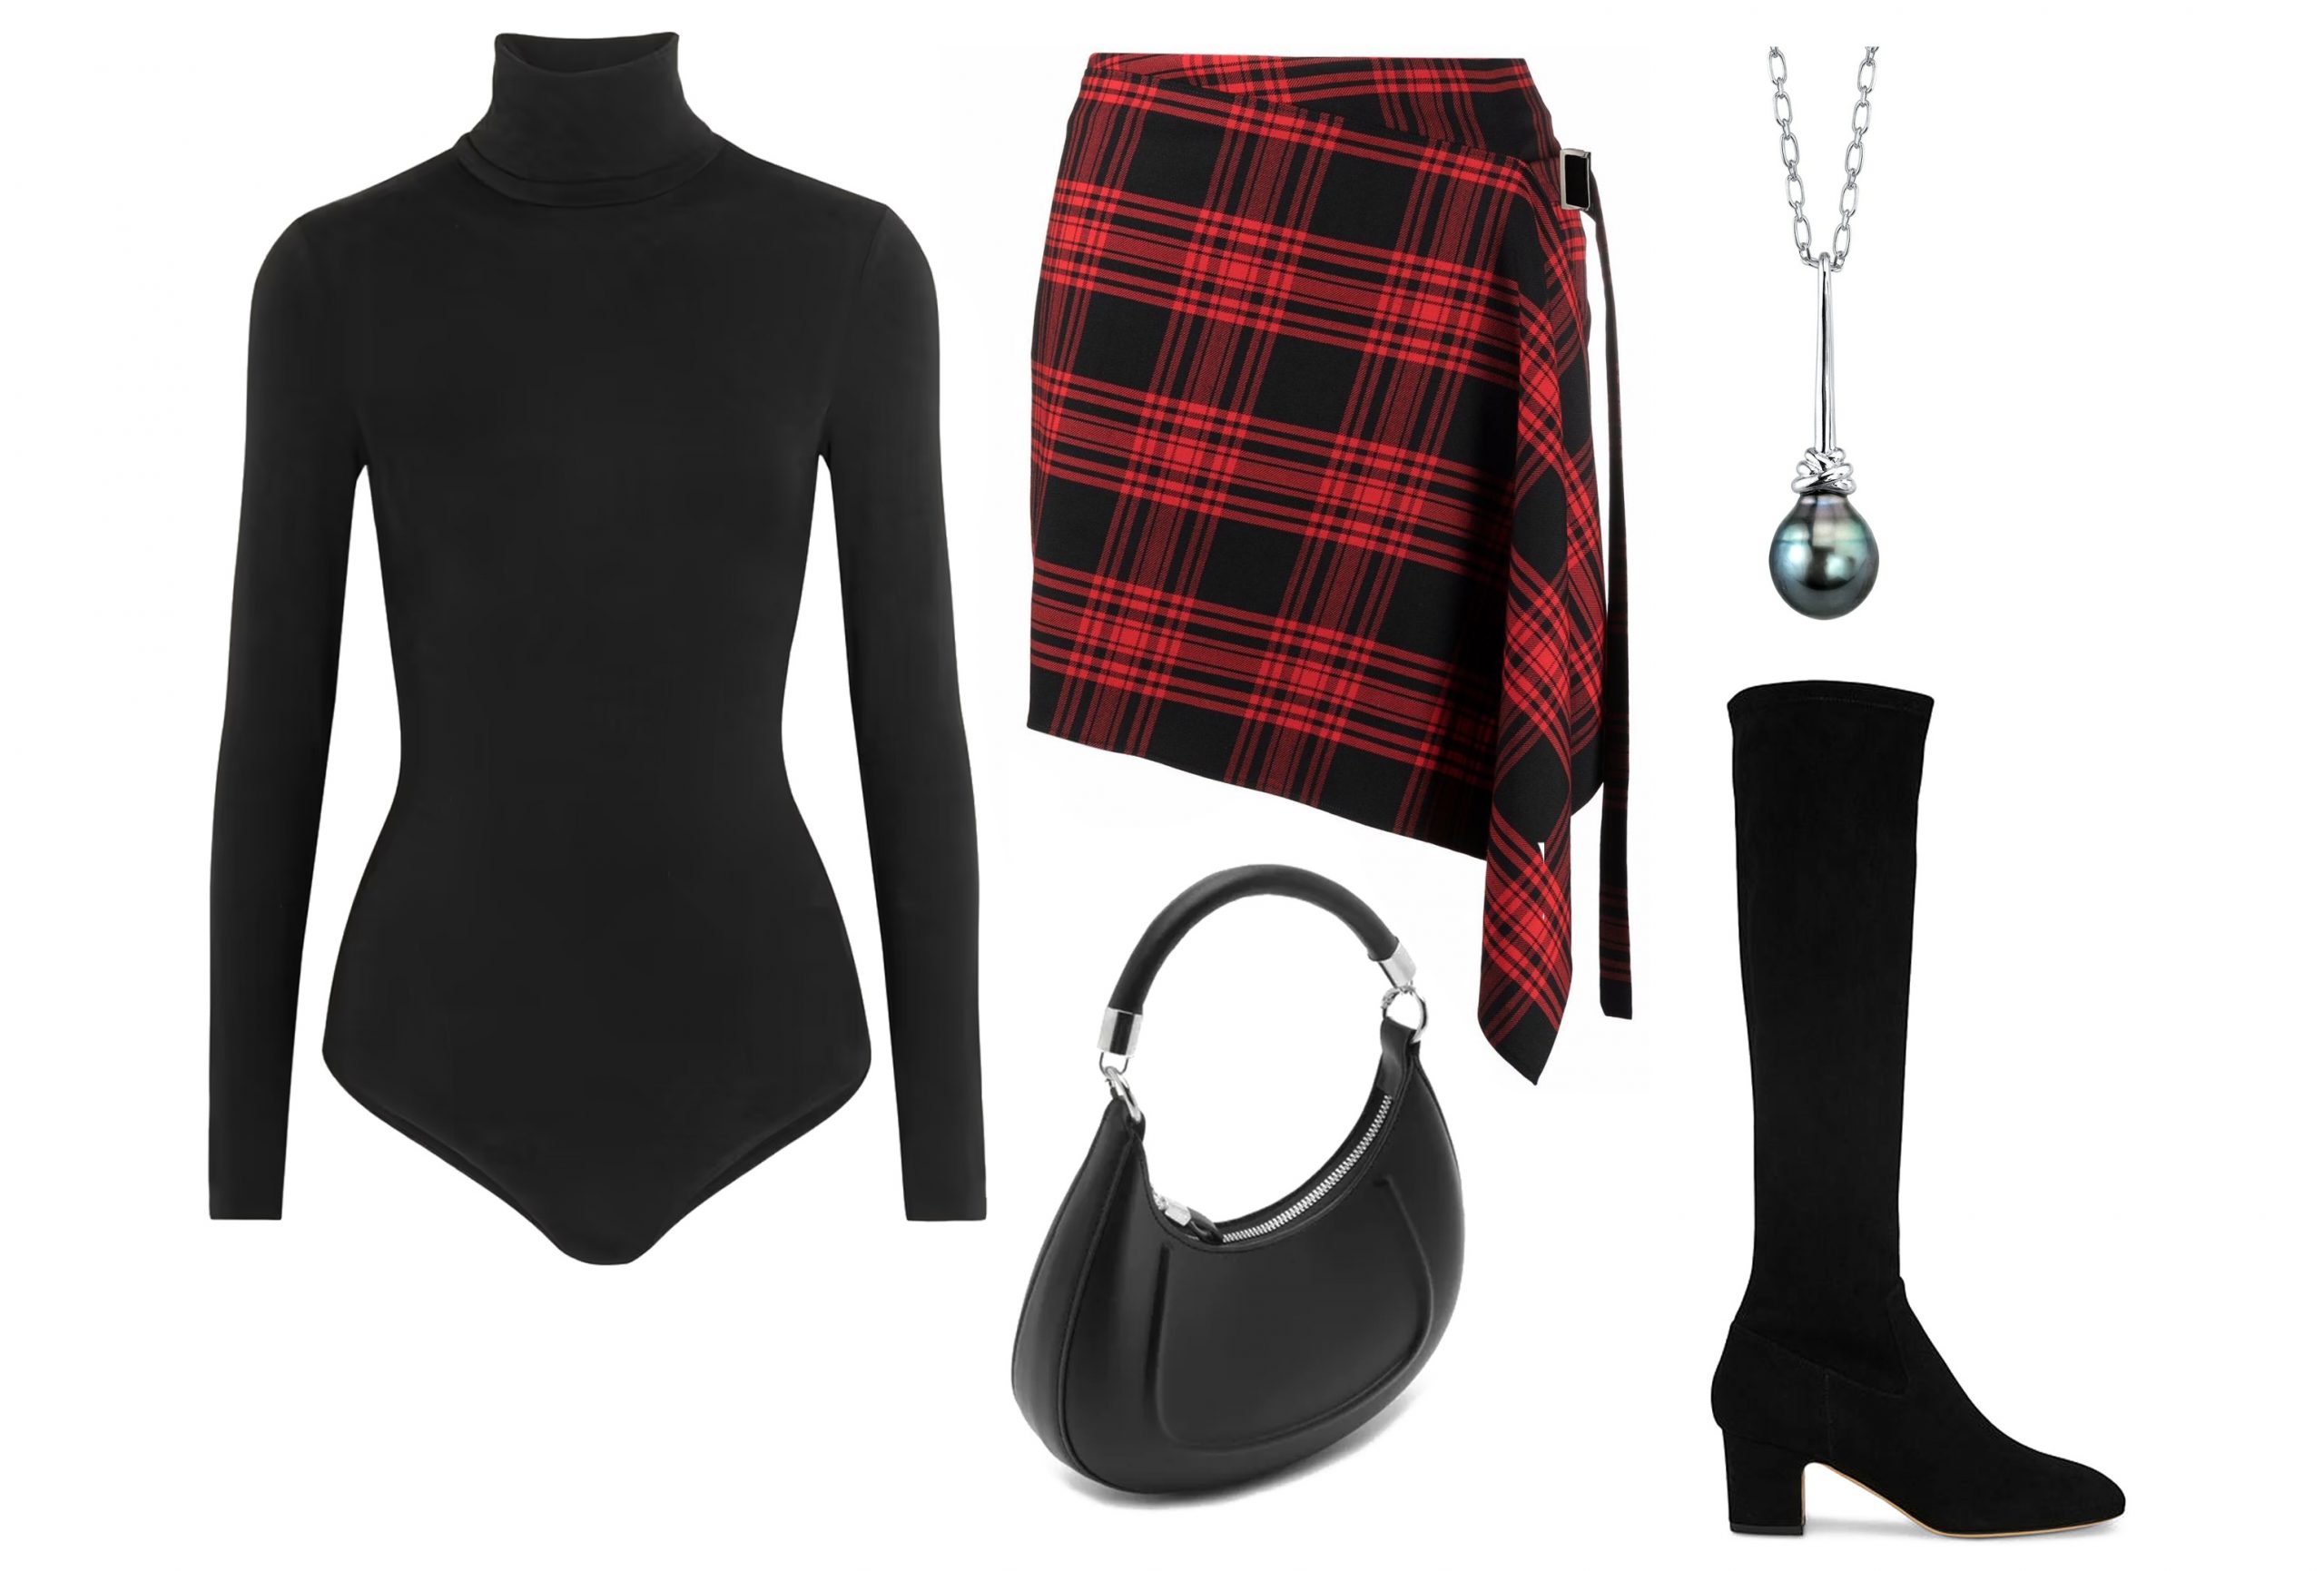 The Cool Christmas Factor: On-Trend Tartan, Christmas Party